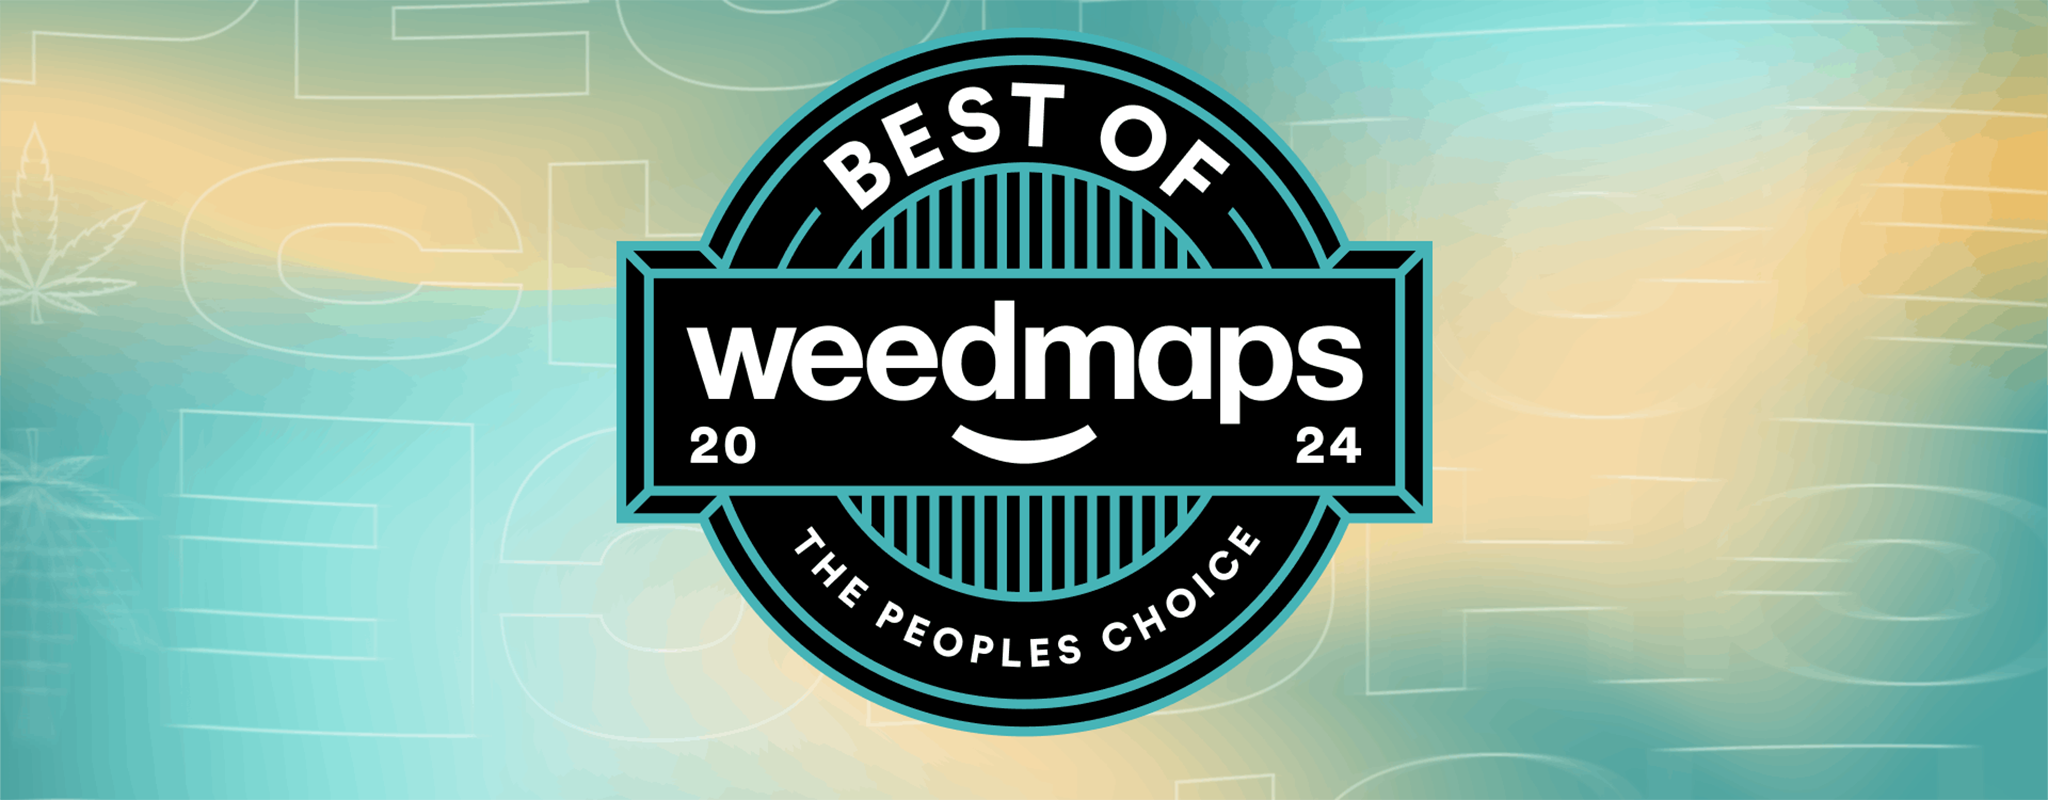 Celebrating Excellence: Purple Lotus Voted Best Dispensary in Northern California